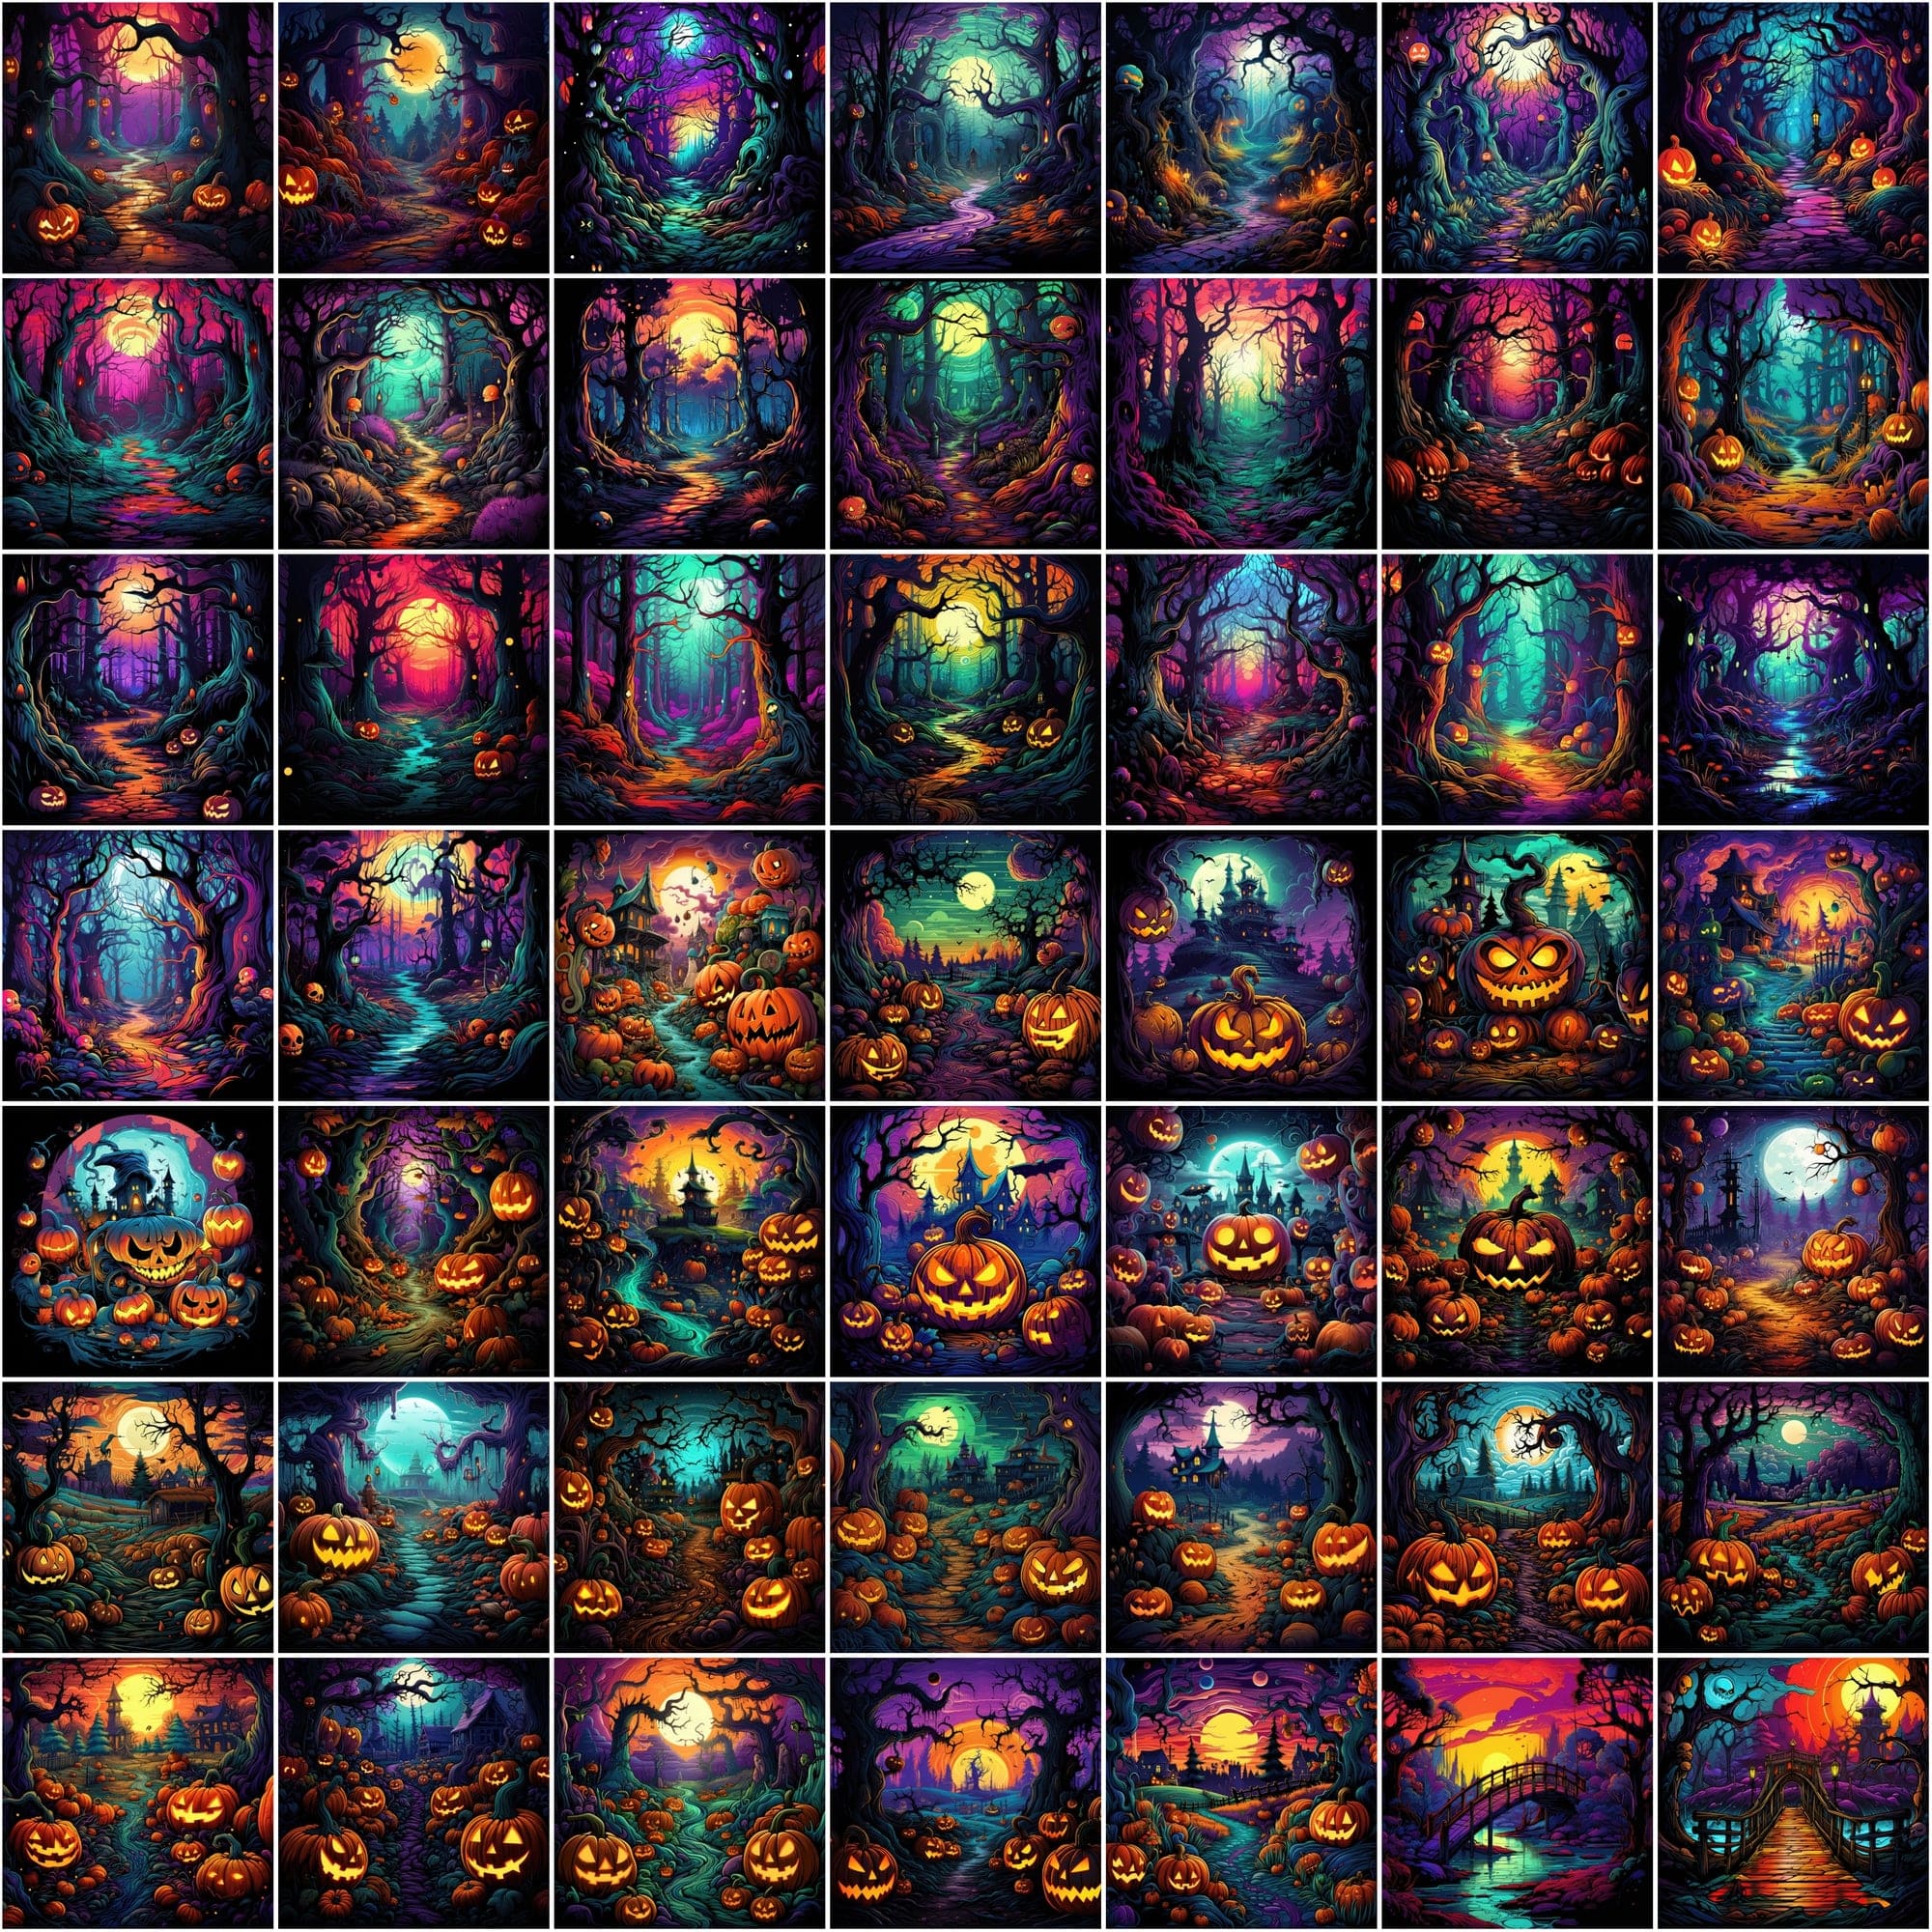 Halloween & Horror PNG Illustrations Pack - 780 High-Quality Colorful Images, Commercial License Included Digital Download Sumobundle